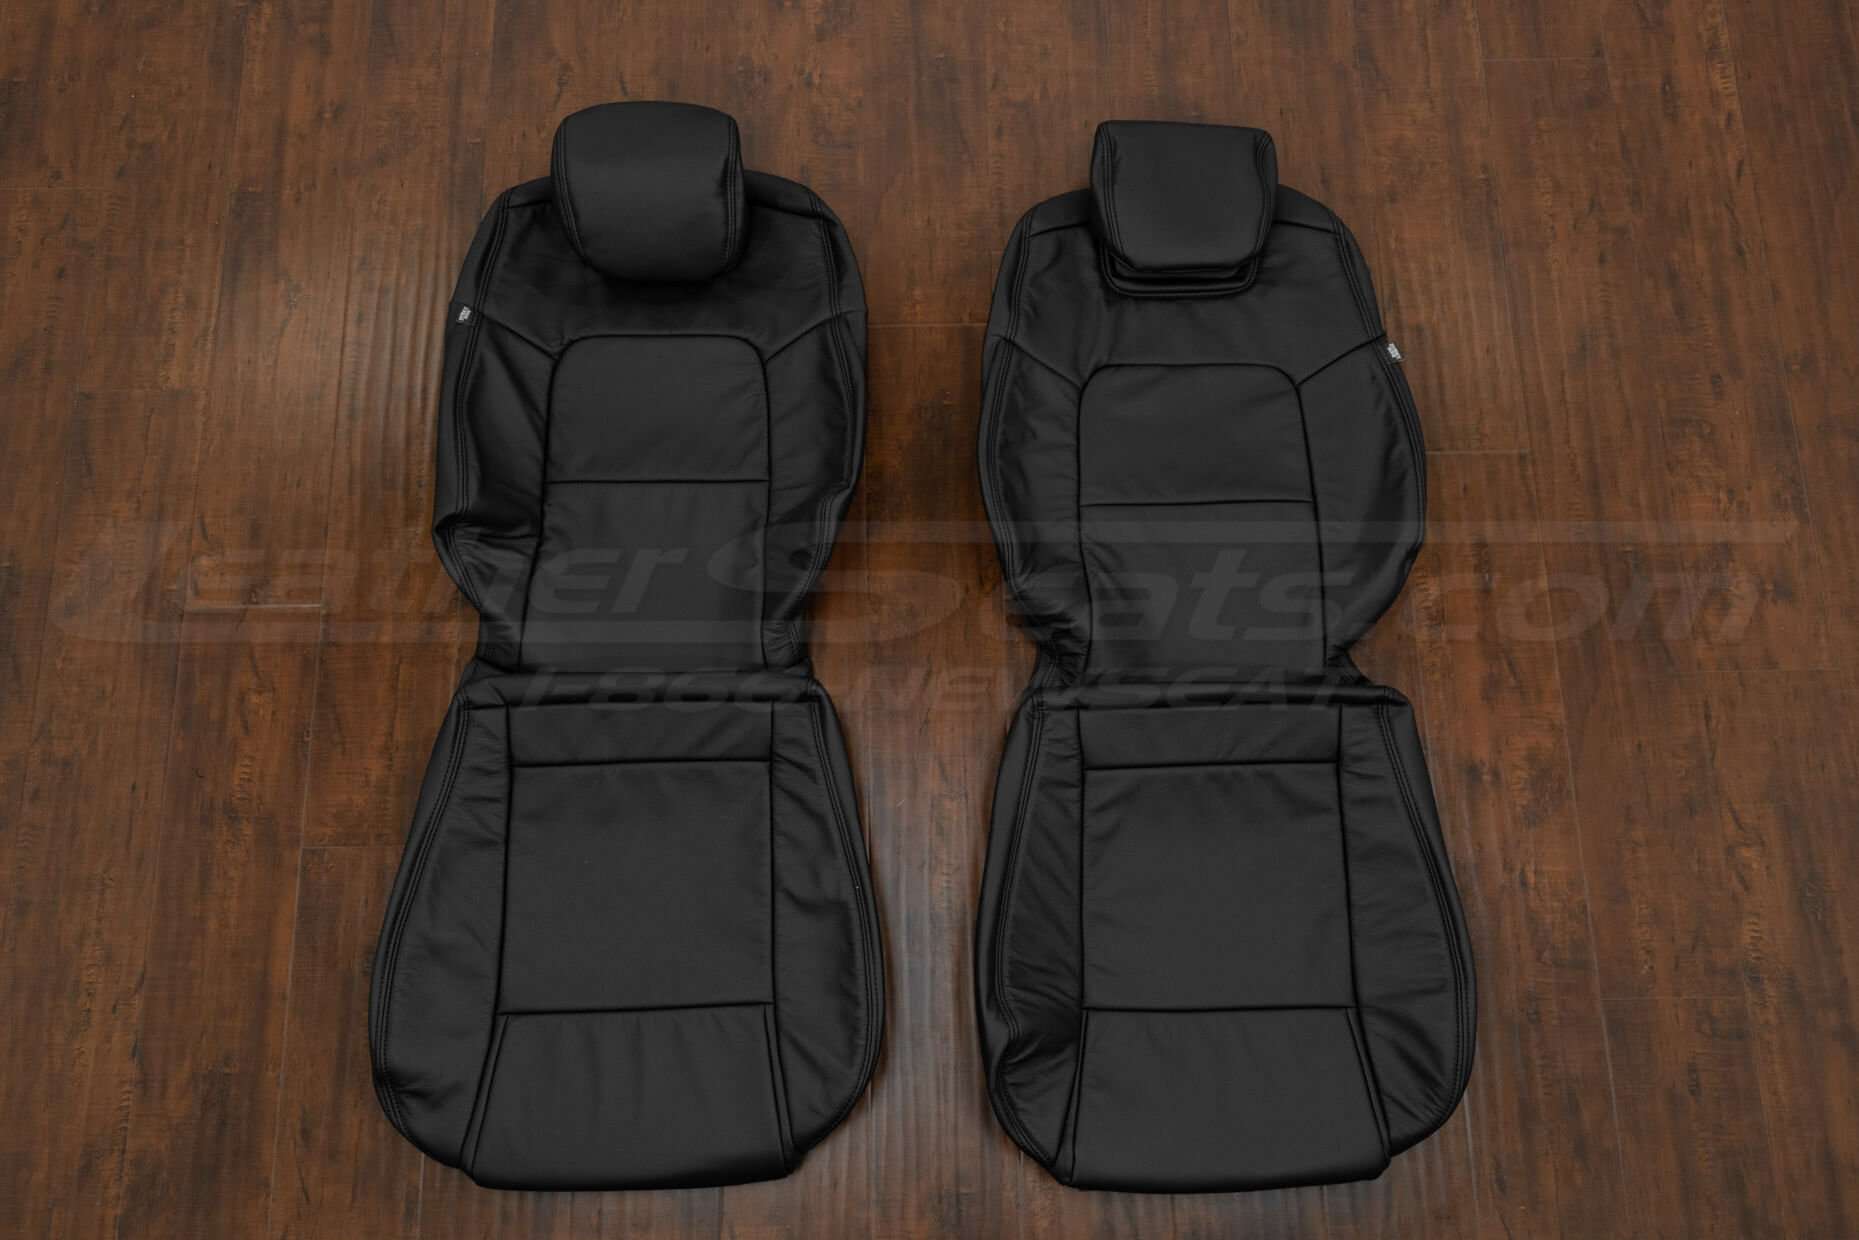 2008 Pontiac G8 Leather Seat Interior Kit - Black - Front seat upholstery